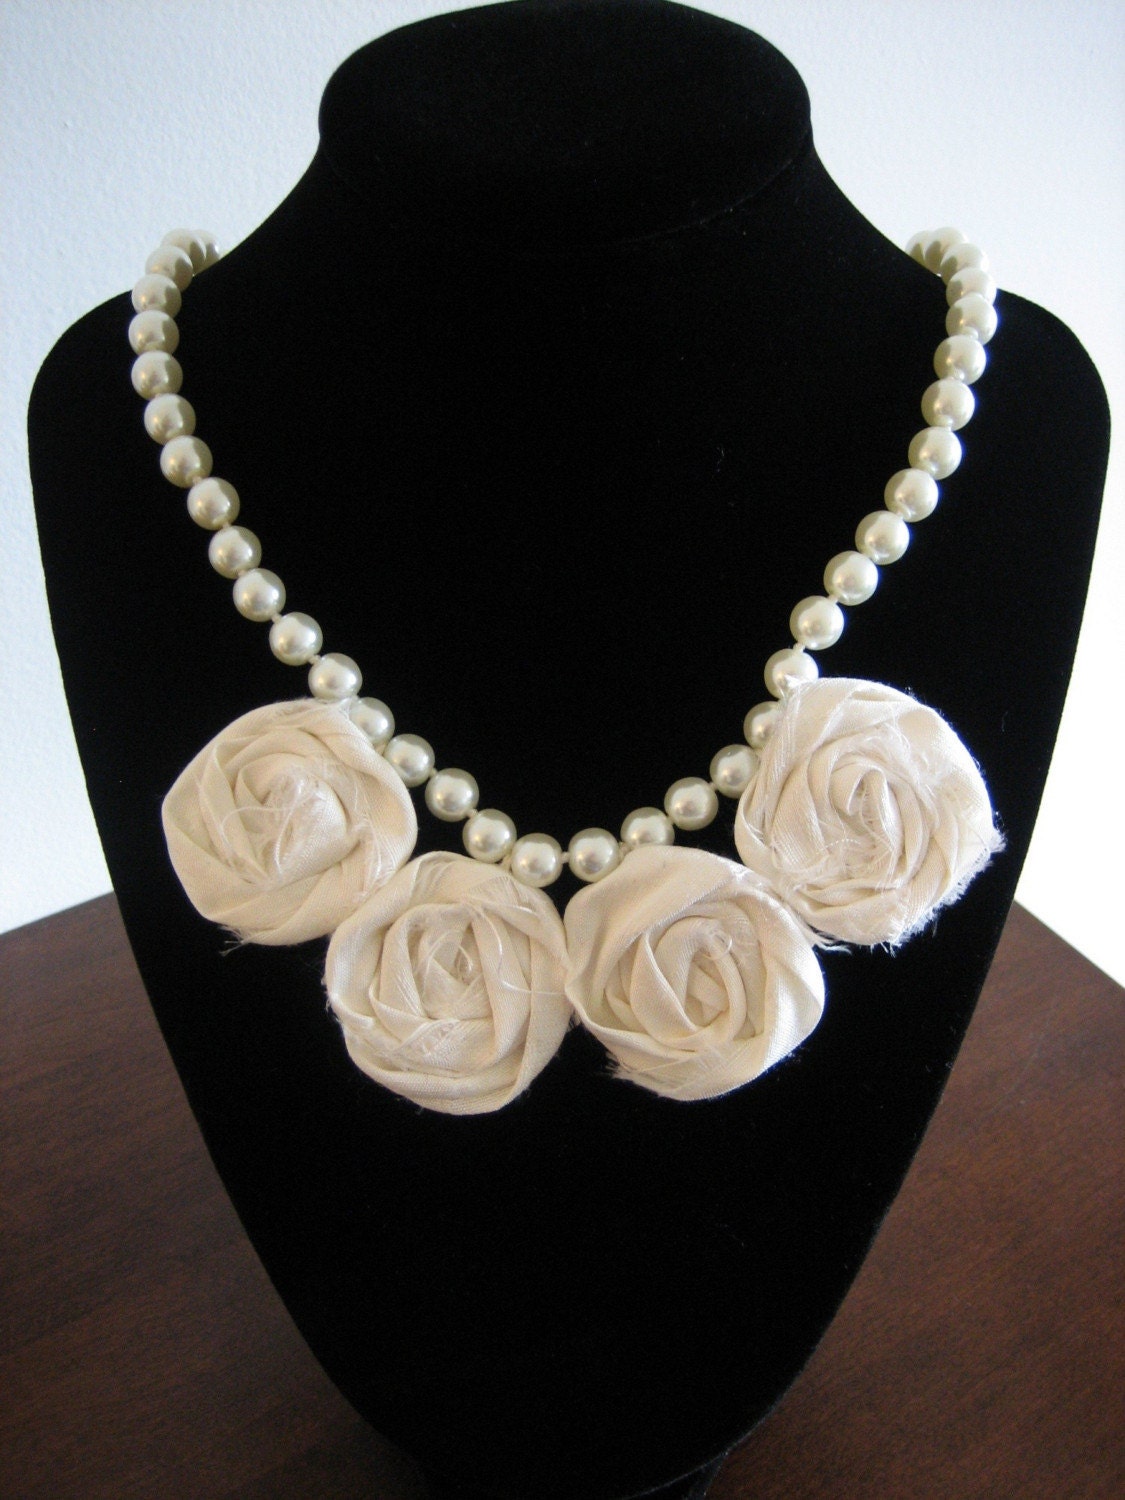 KATYA Necklace - Pearl Strand with Rosettes Bloom